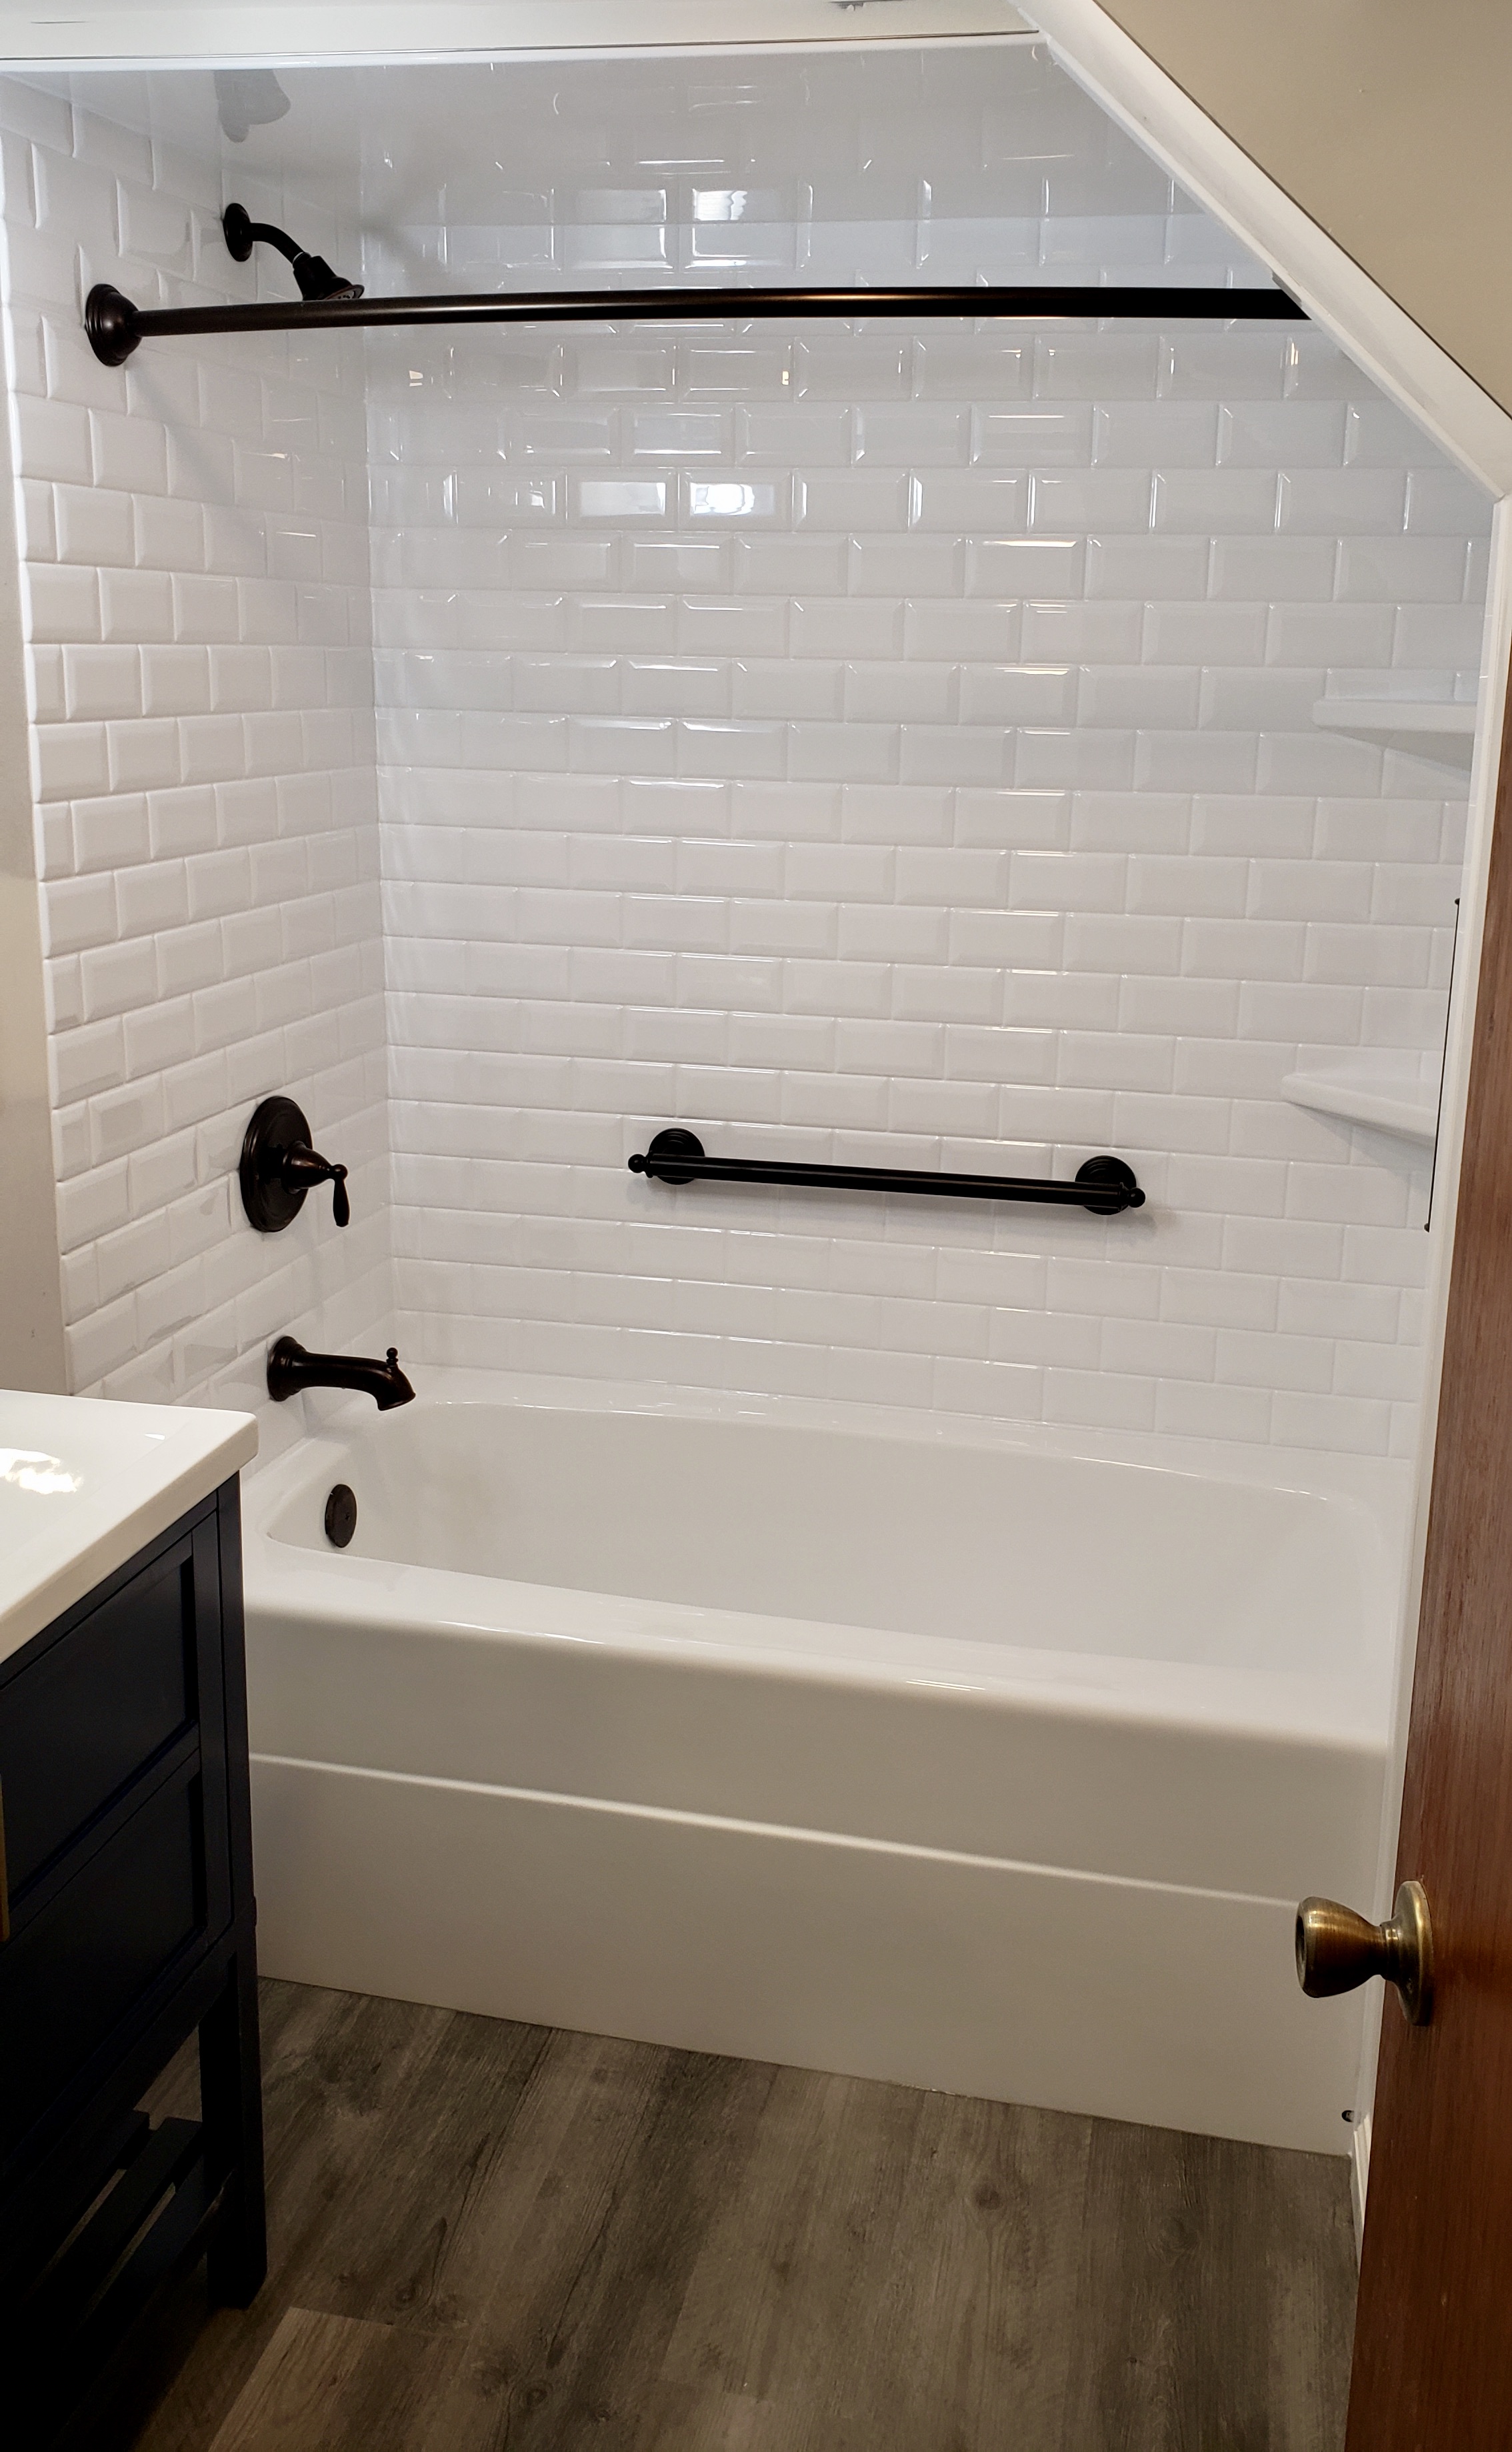 Completed Bathroom Remodeling Projects, Pics Of Tiled Bathtubs